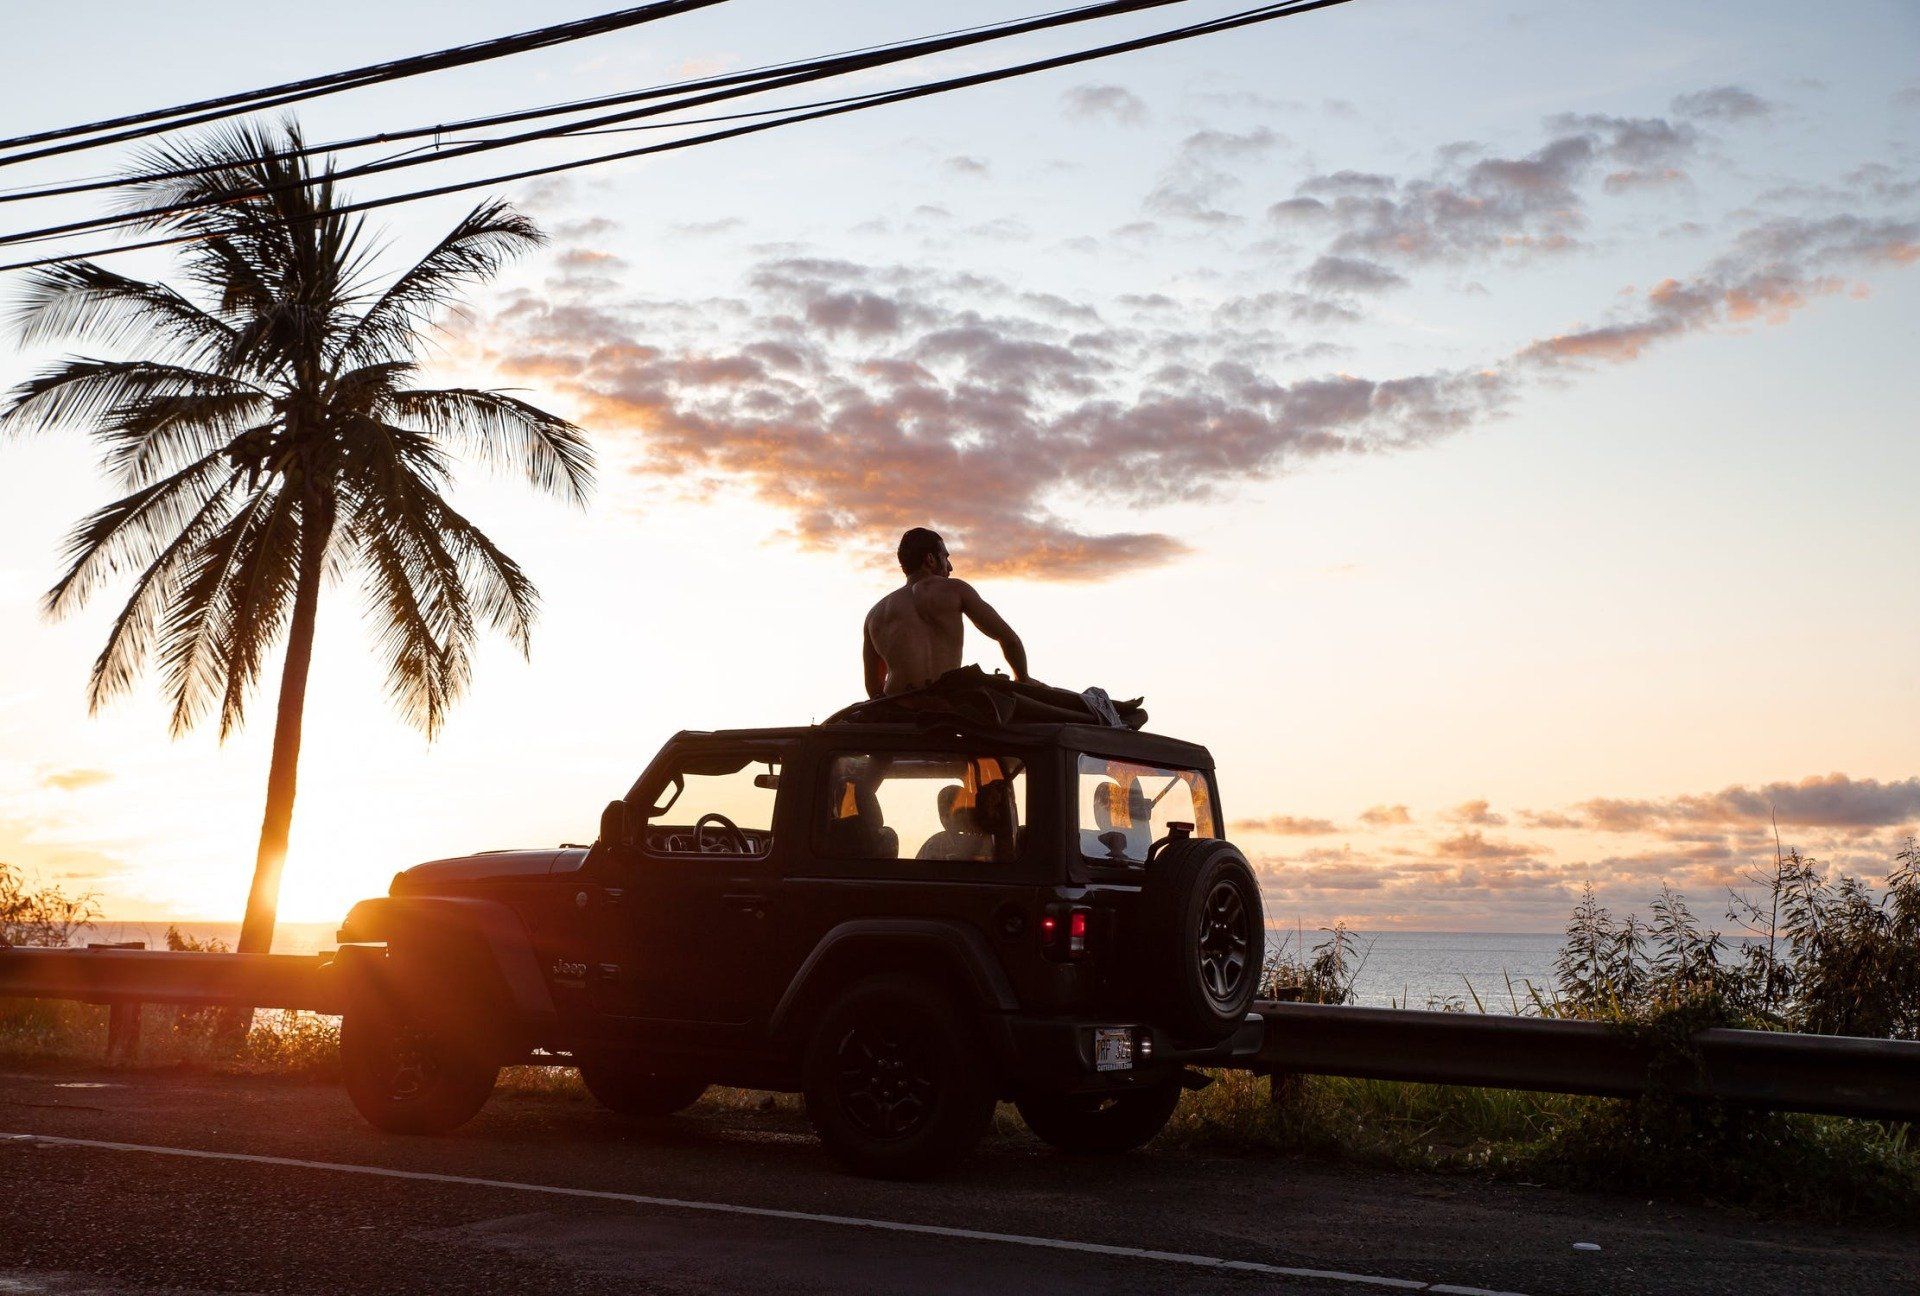 A man sitting on the top of the jeep wrangler